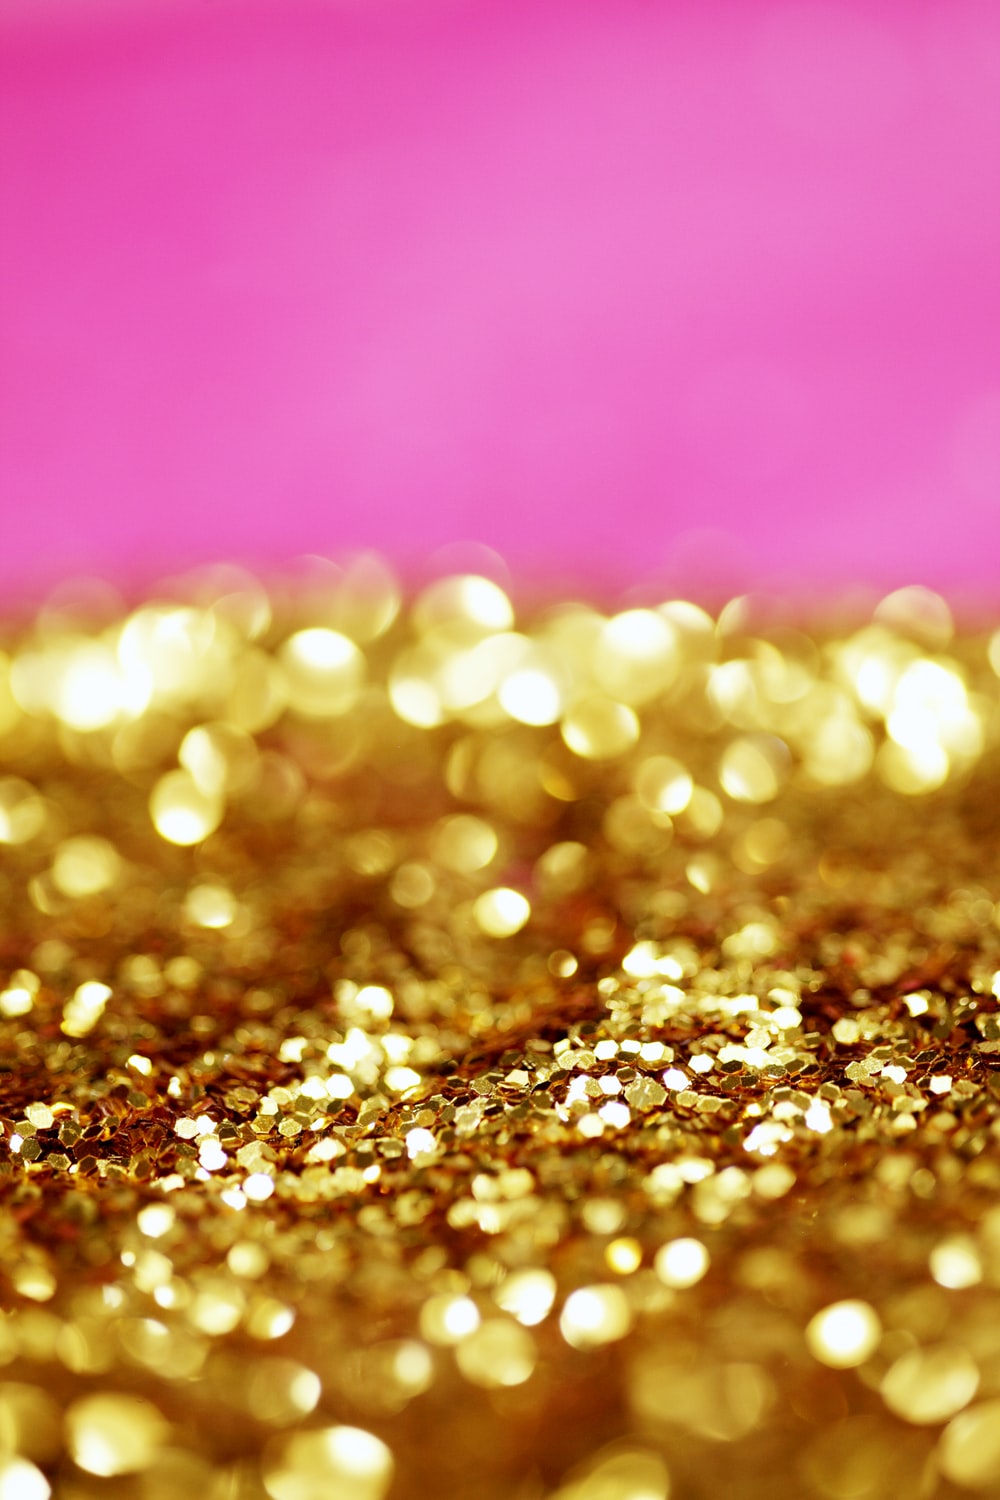 Pink Glitter Picture. Download Free Image